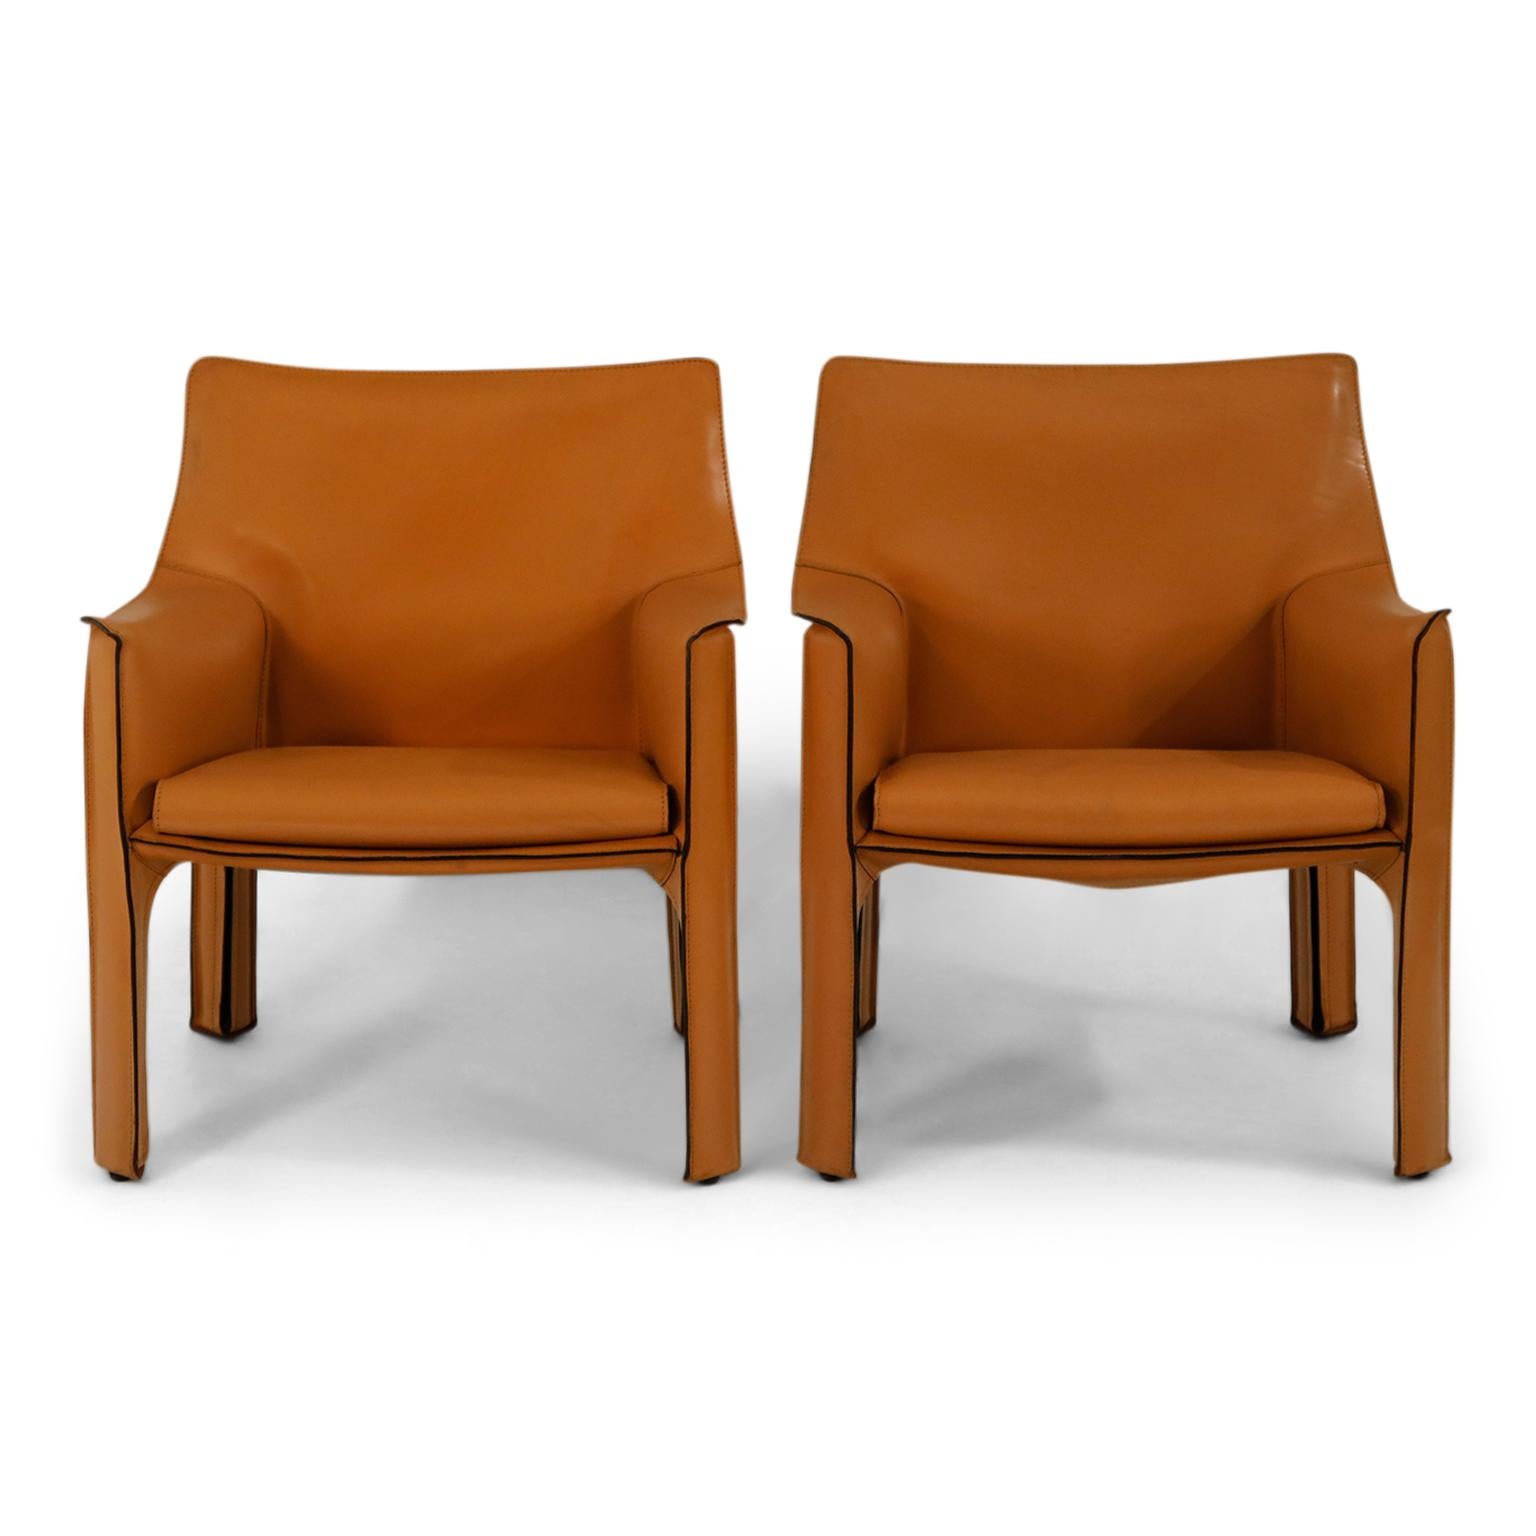 *NOTE* This listing is for a pair of chairs.  We accidentally submitted it as a single in the description and now cannot be edited but it is for a pair of chairs, not for a single. 

A beautiful pair of Mario Bellini Cab lounge chairs in exemplary